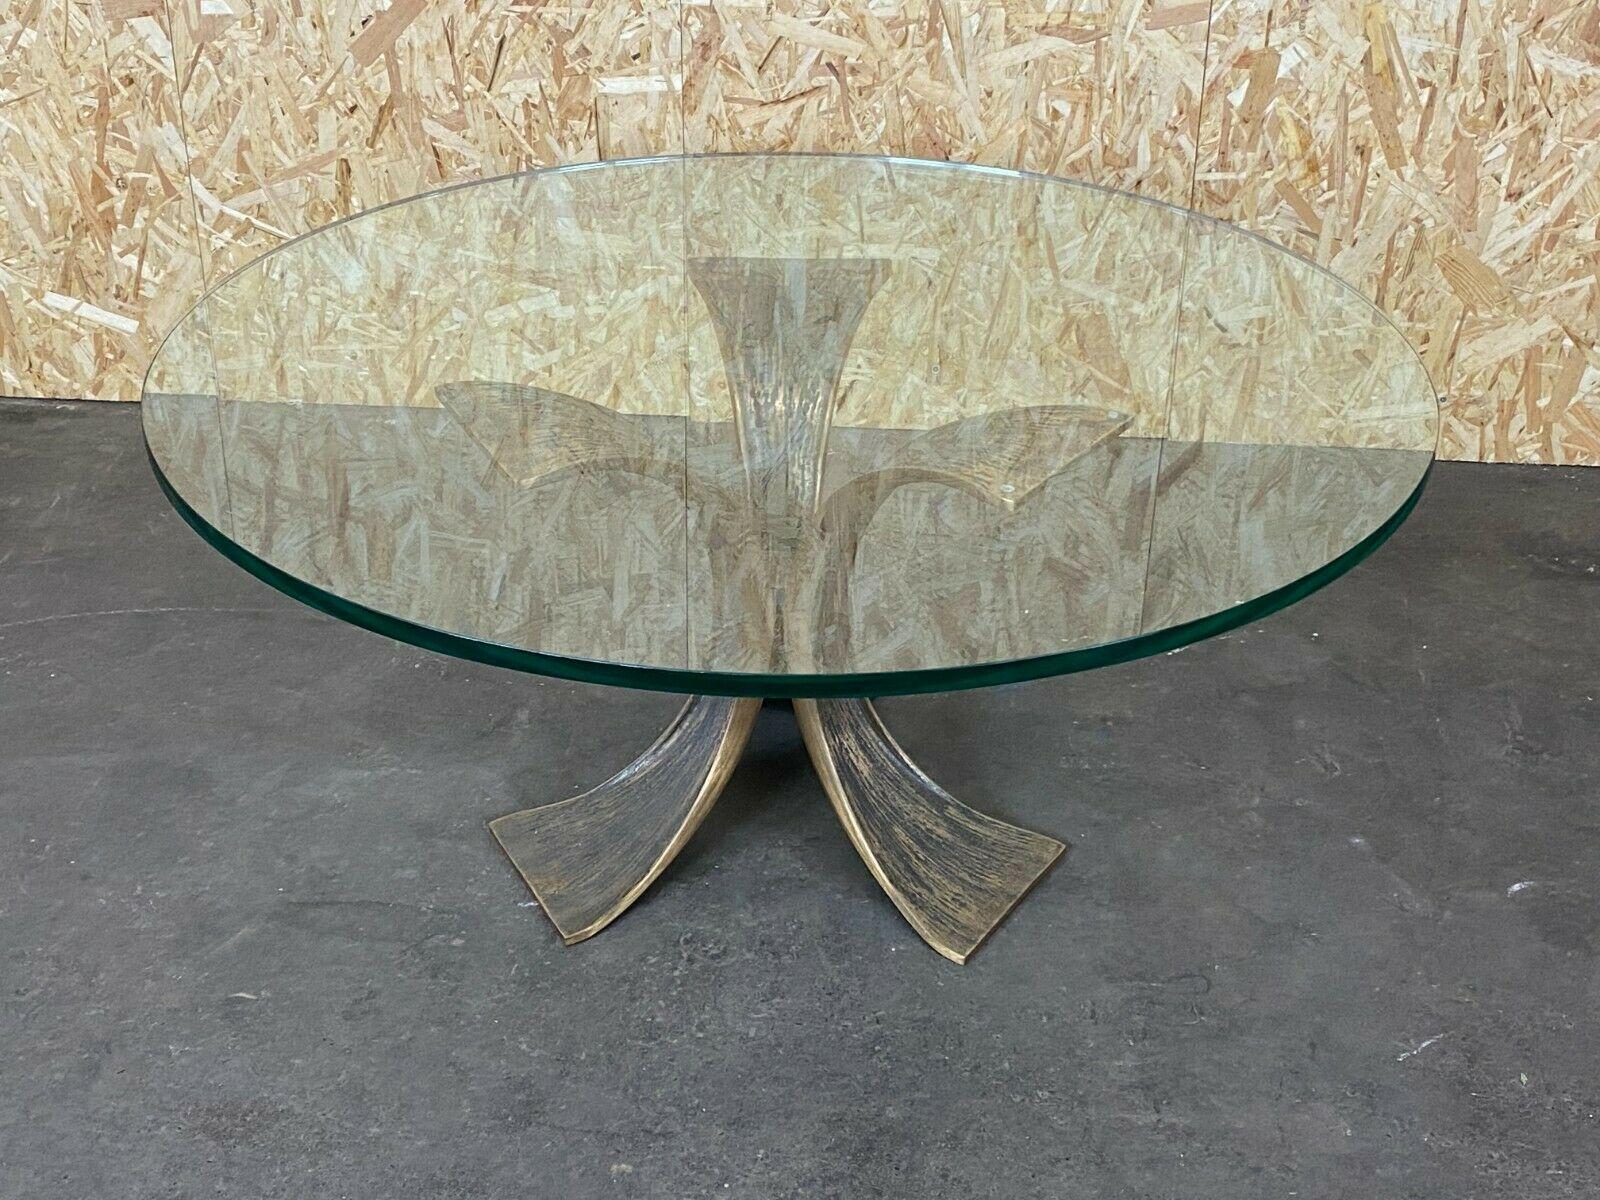 60s 70s coffee table Luciano Frigerio brutalist bronze glass table 60s

Object: coffee table

Manufacturer: Luciano Frigerio

Condition: good

Age: around 1960-1970

Dimensions:

Diameter = 110cm
Height = 47cm

Other notes:

The